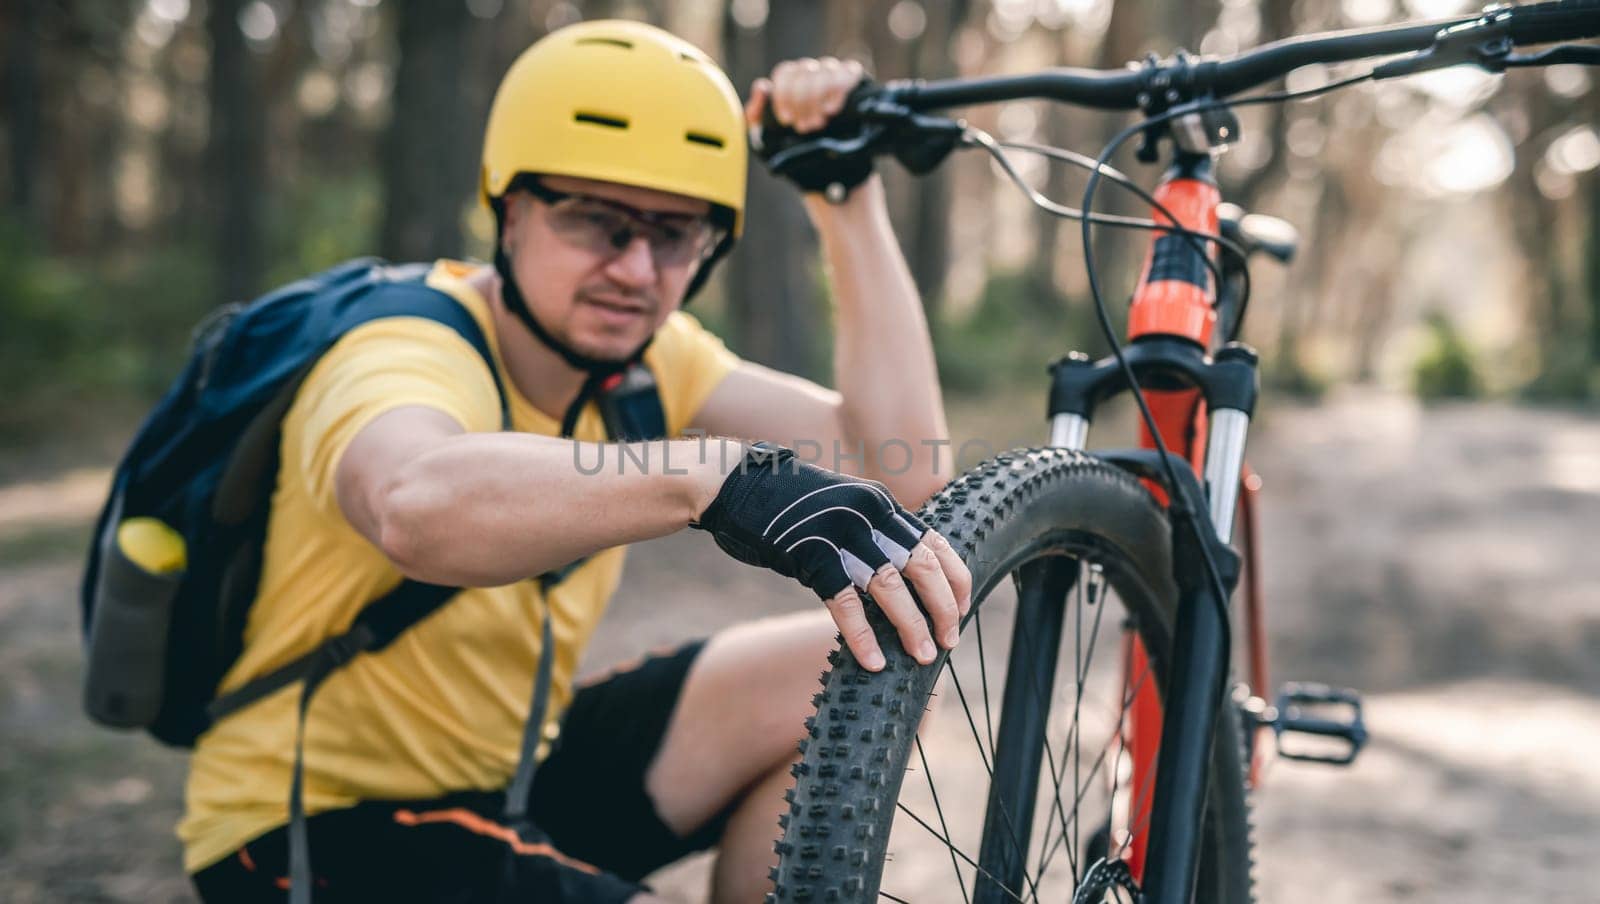 Man cyclist checking bicycle tire pressure before ride in forest